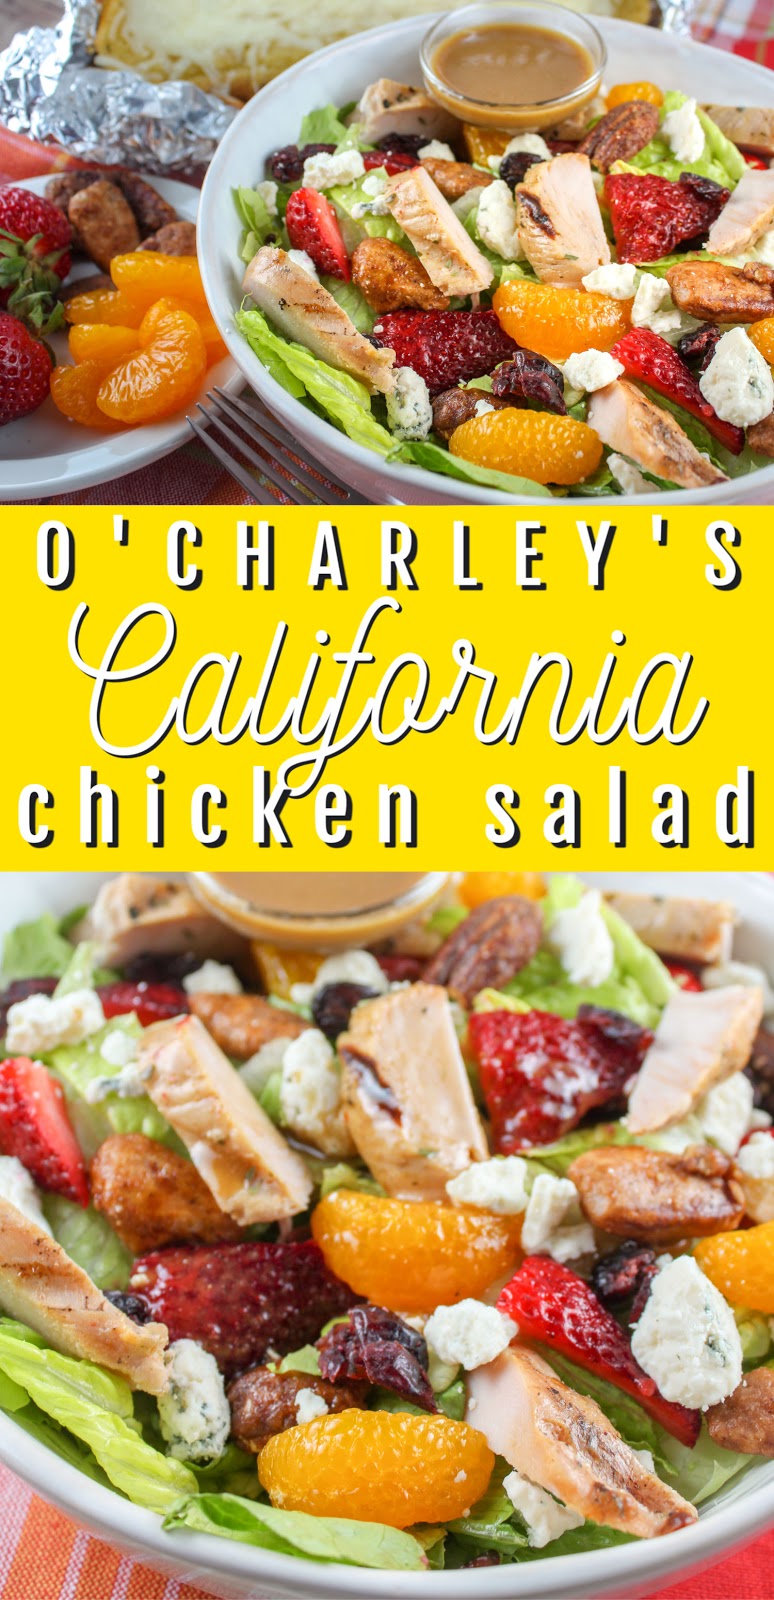 O’Charley’s California Chicken Salad is a new favorite! Grilled chicken with strawberries & mandarin oranges are then mixed with candied pecans, blue cheese and homemade Balsamic vinaigrette – so good!
 via @foodhussy